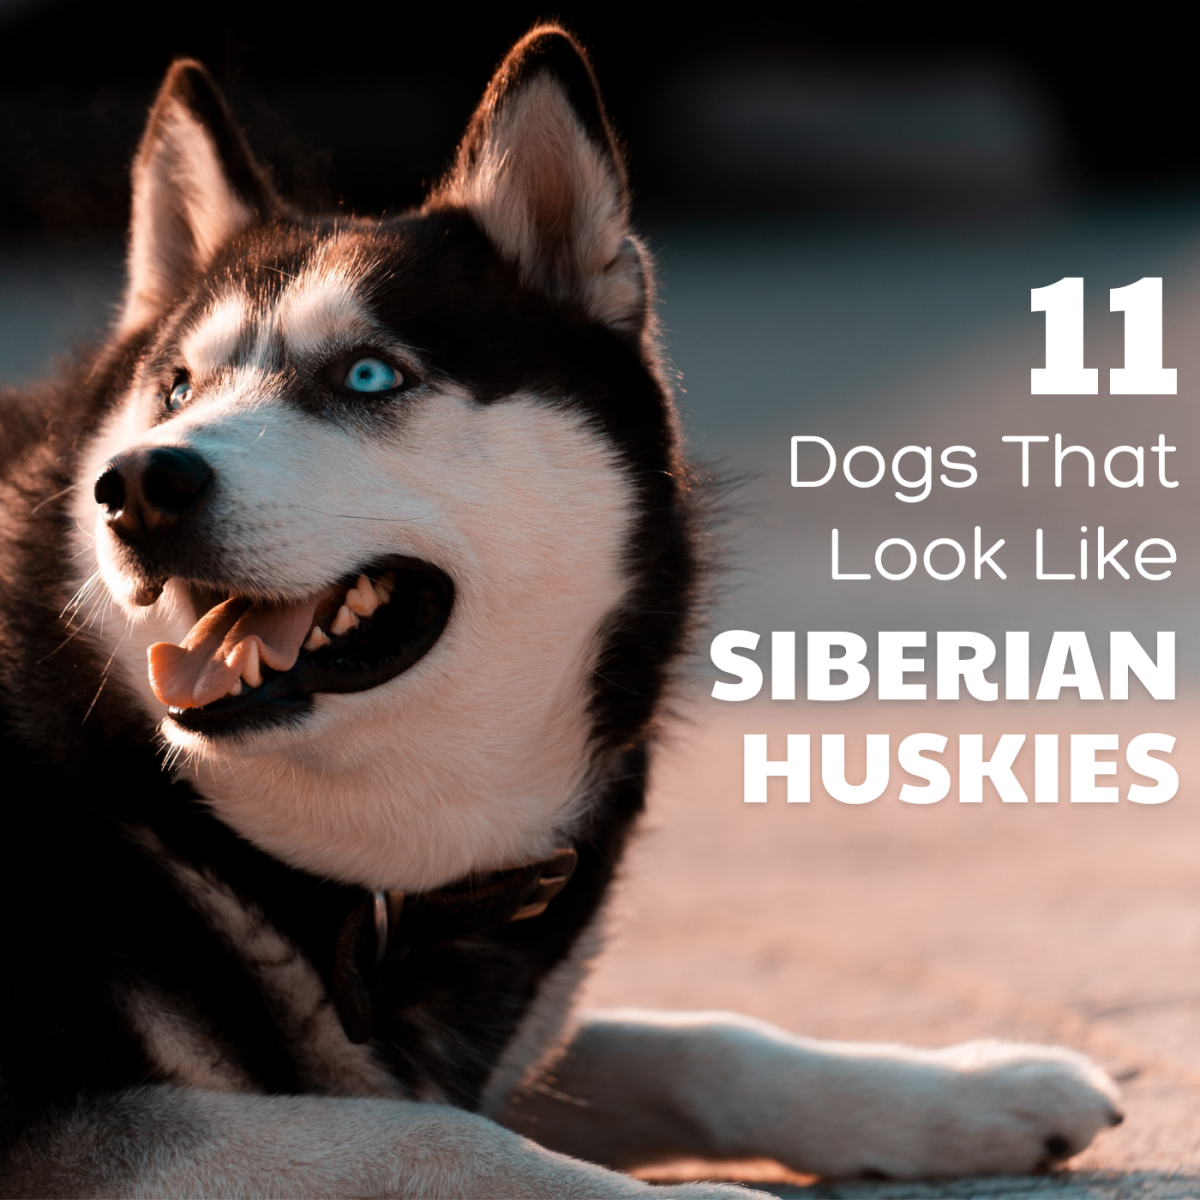 Are you searching for a dog breed that looks like a Siberian Husky—but isn't a Husky? Discover 11 gorgeous Husky-like breeds!